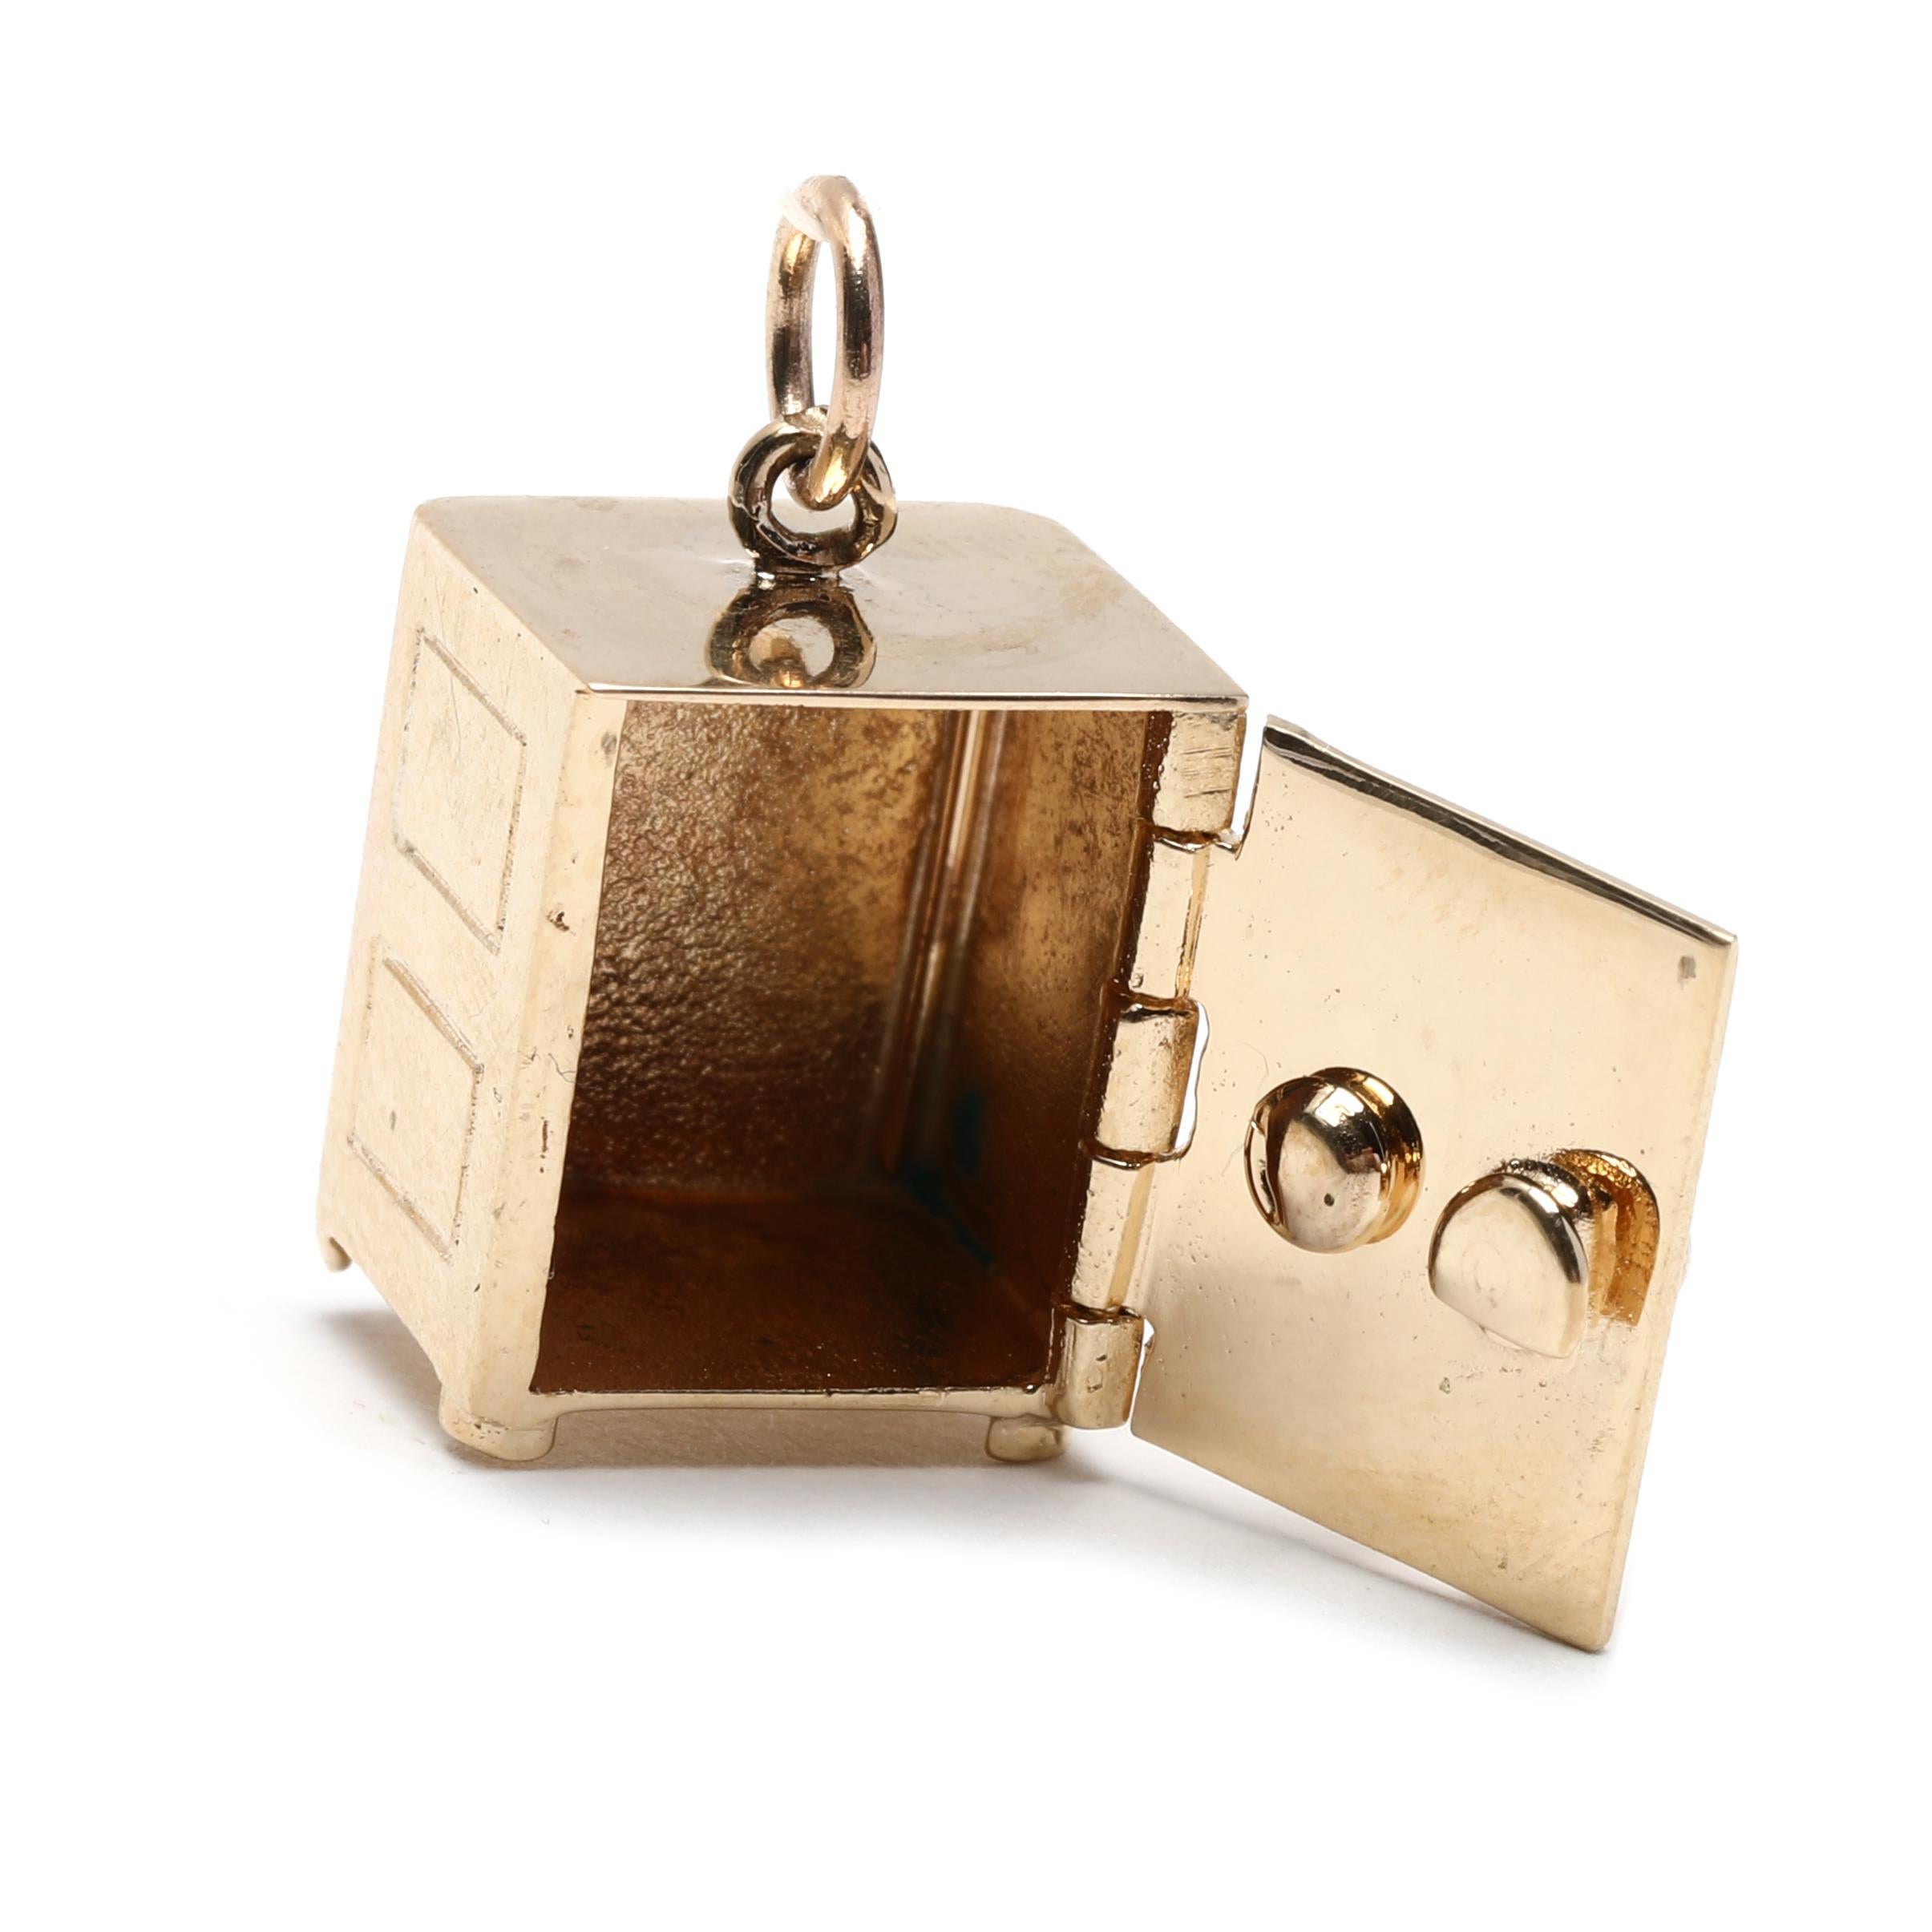 This 14K Yellow Gold Small Gold Safe Charm is the perfect addition for any jewelry collection. This charming safe charm is 3/4 inch in length and features a working safe with an articulated lid. Crafted from 14K yellow gold, it is sure to add a